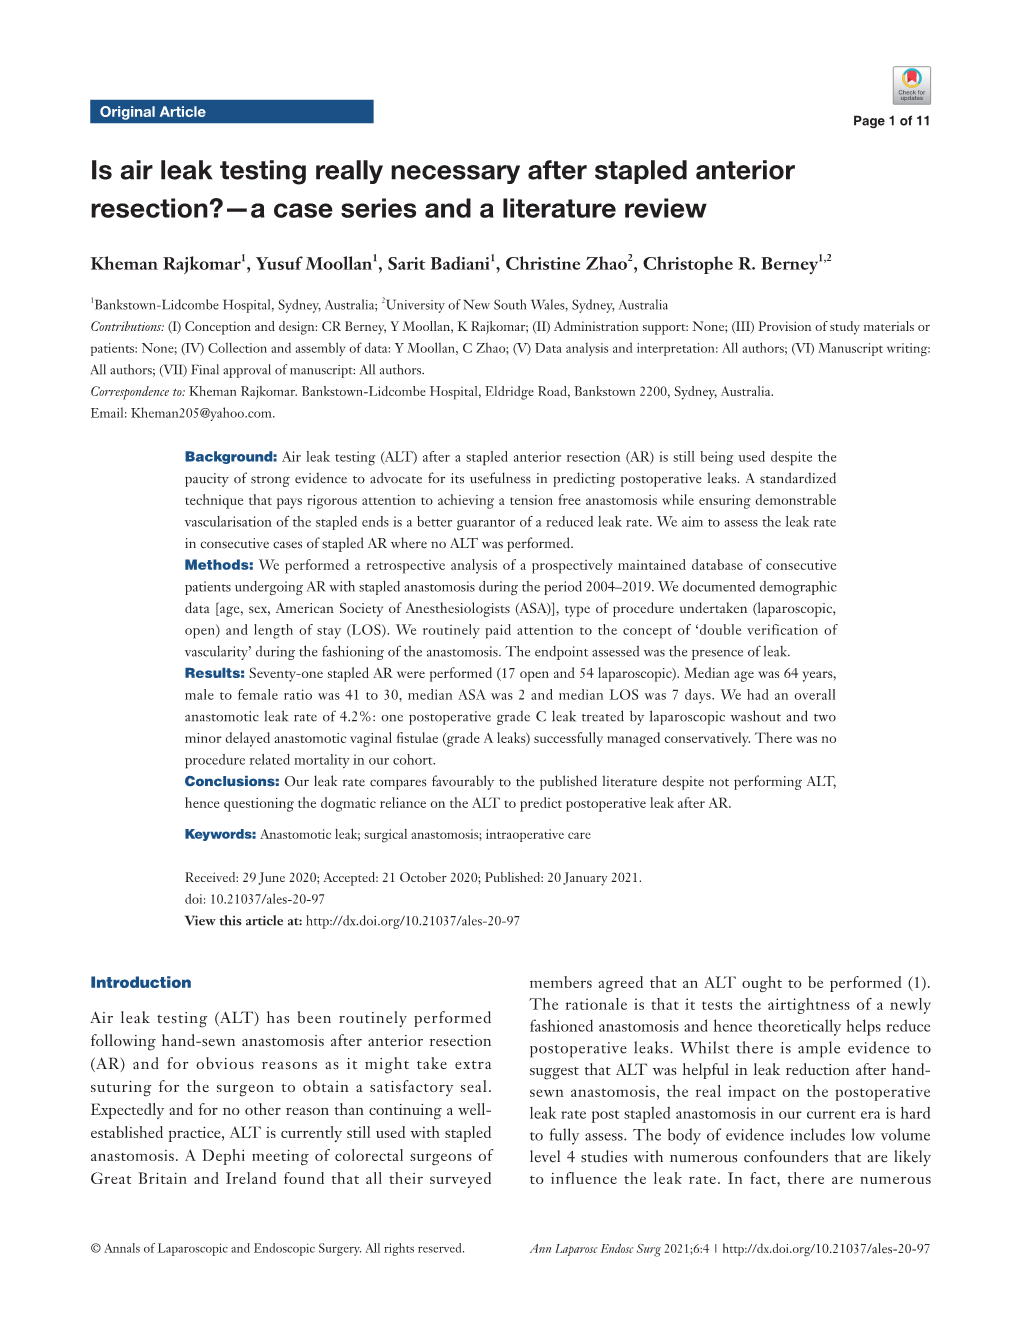 Is Air Leak Testing Really Necessary After Stapled Anterior Resection?—A Case Series and a Literature Review